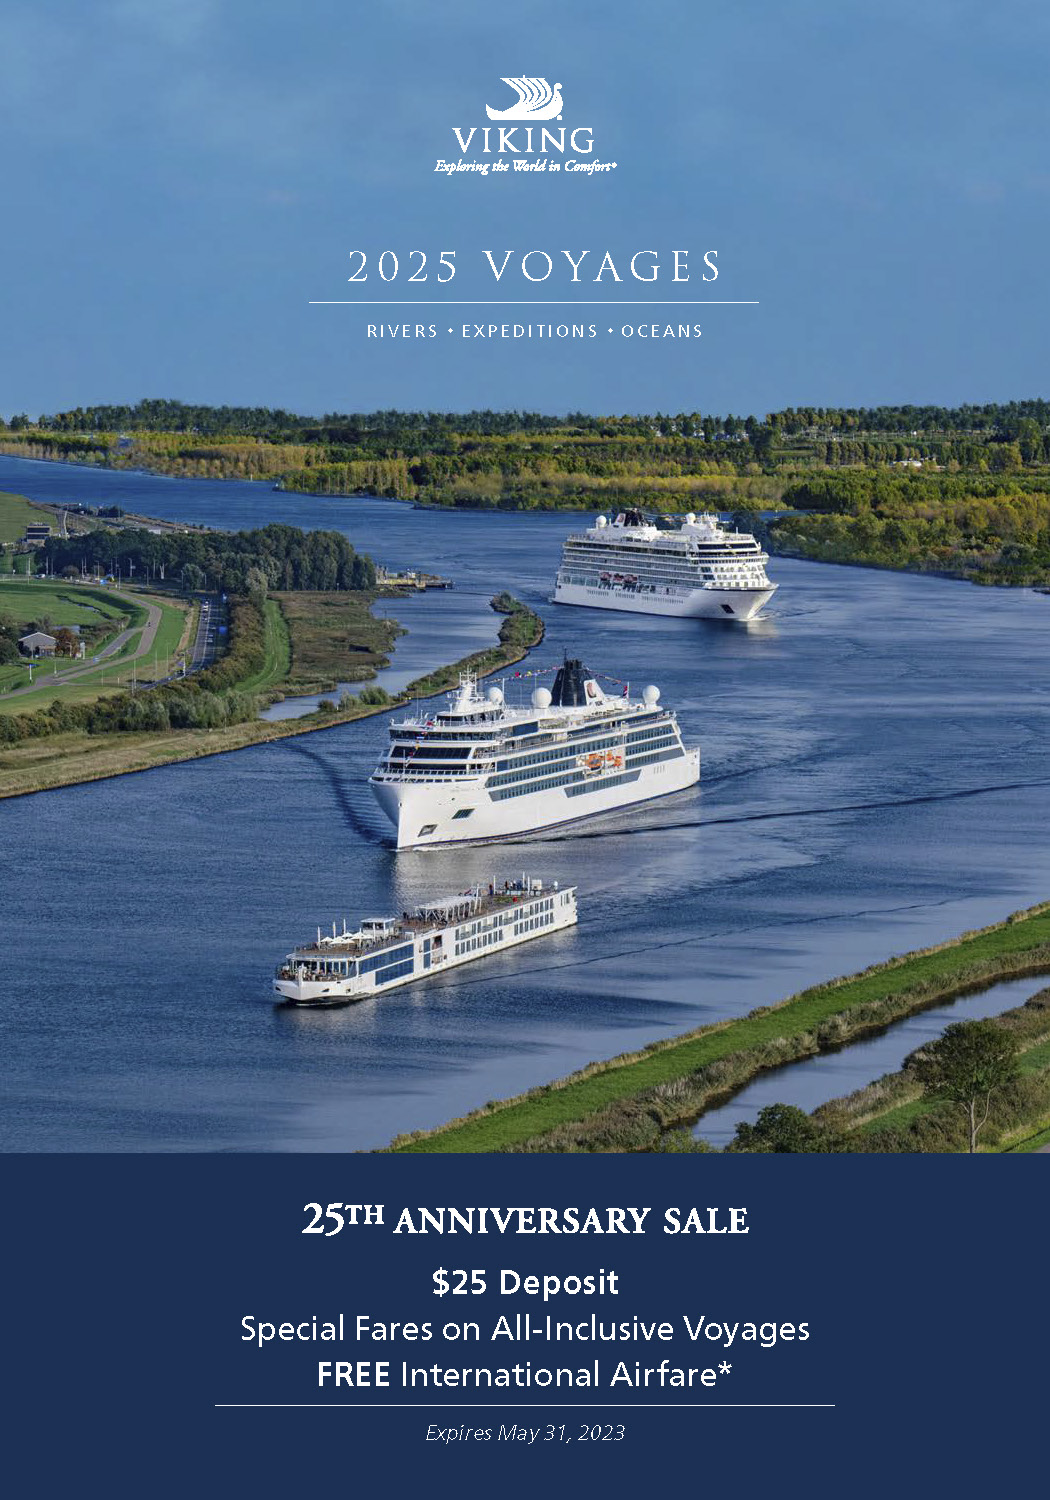 Viking Ocean Cruises Thank You For Requesting a Brochure